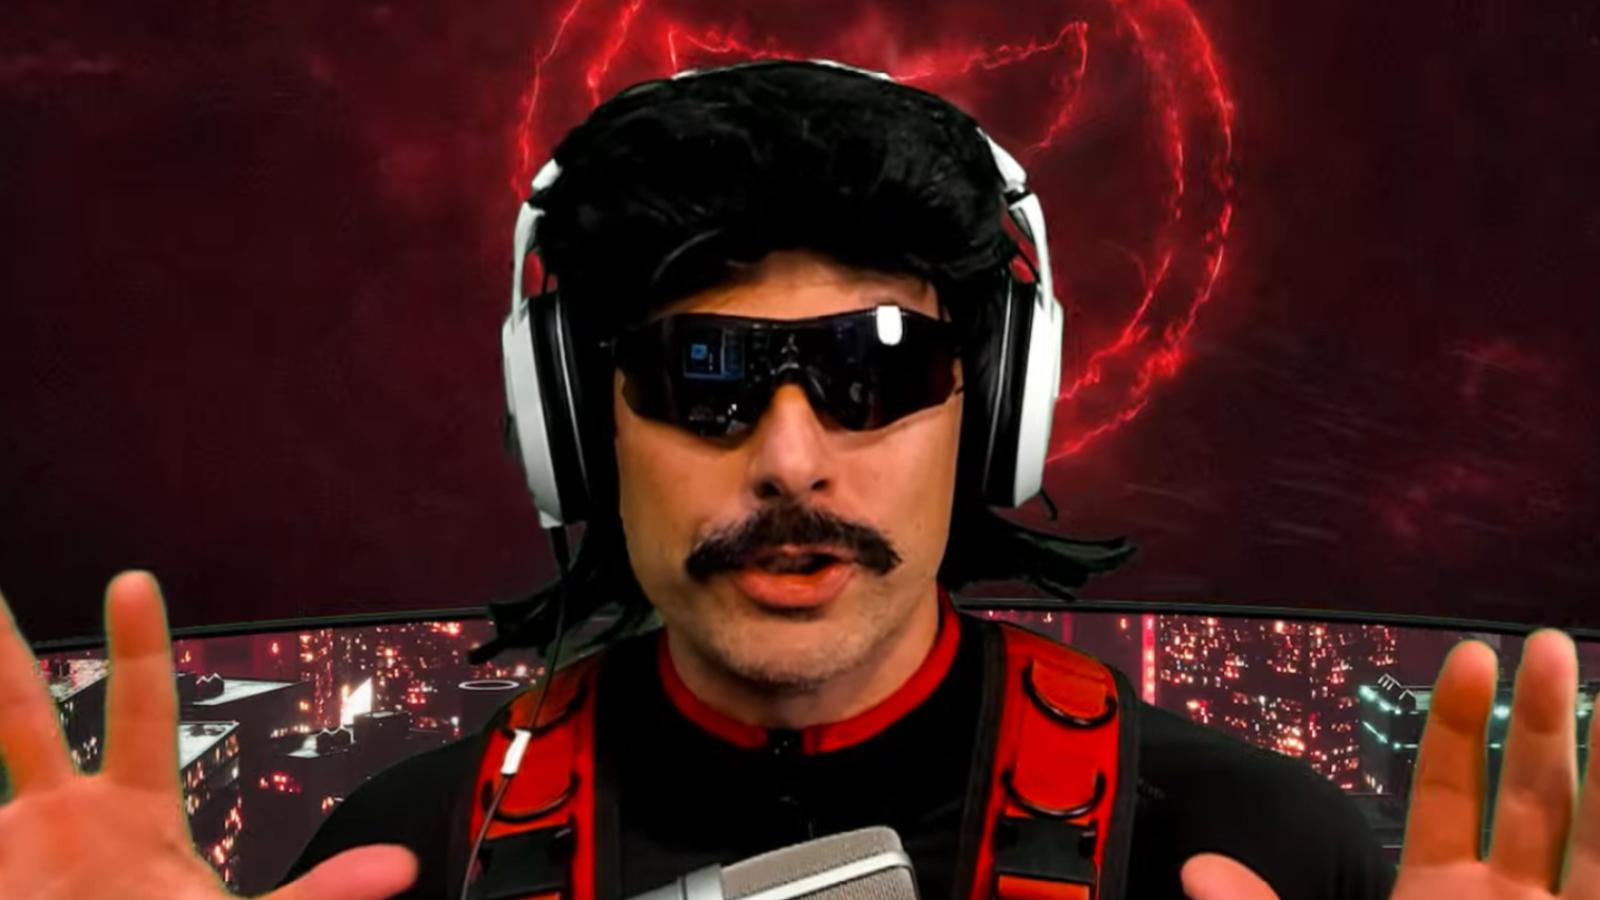 Dr Disrespect live streaming on YouTube.